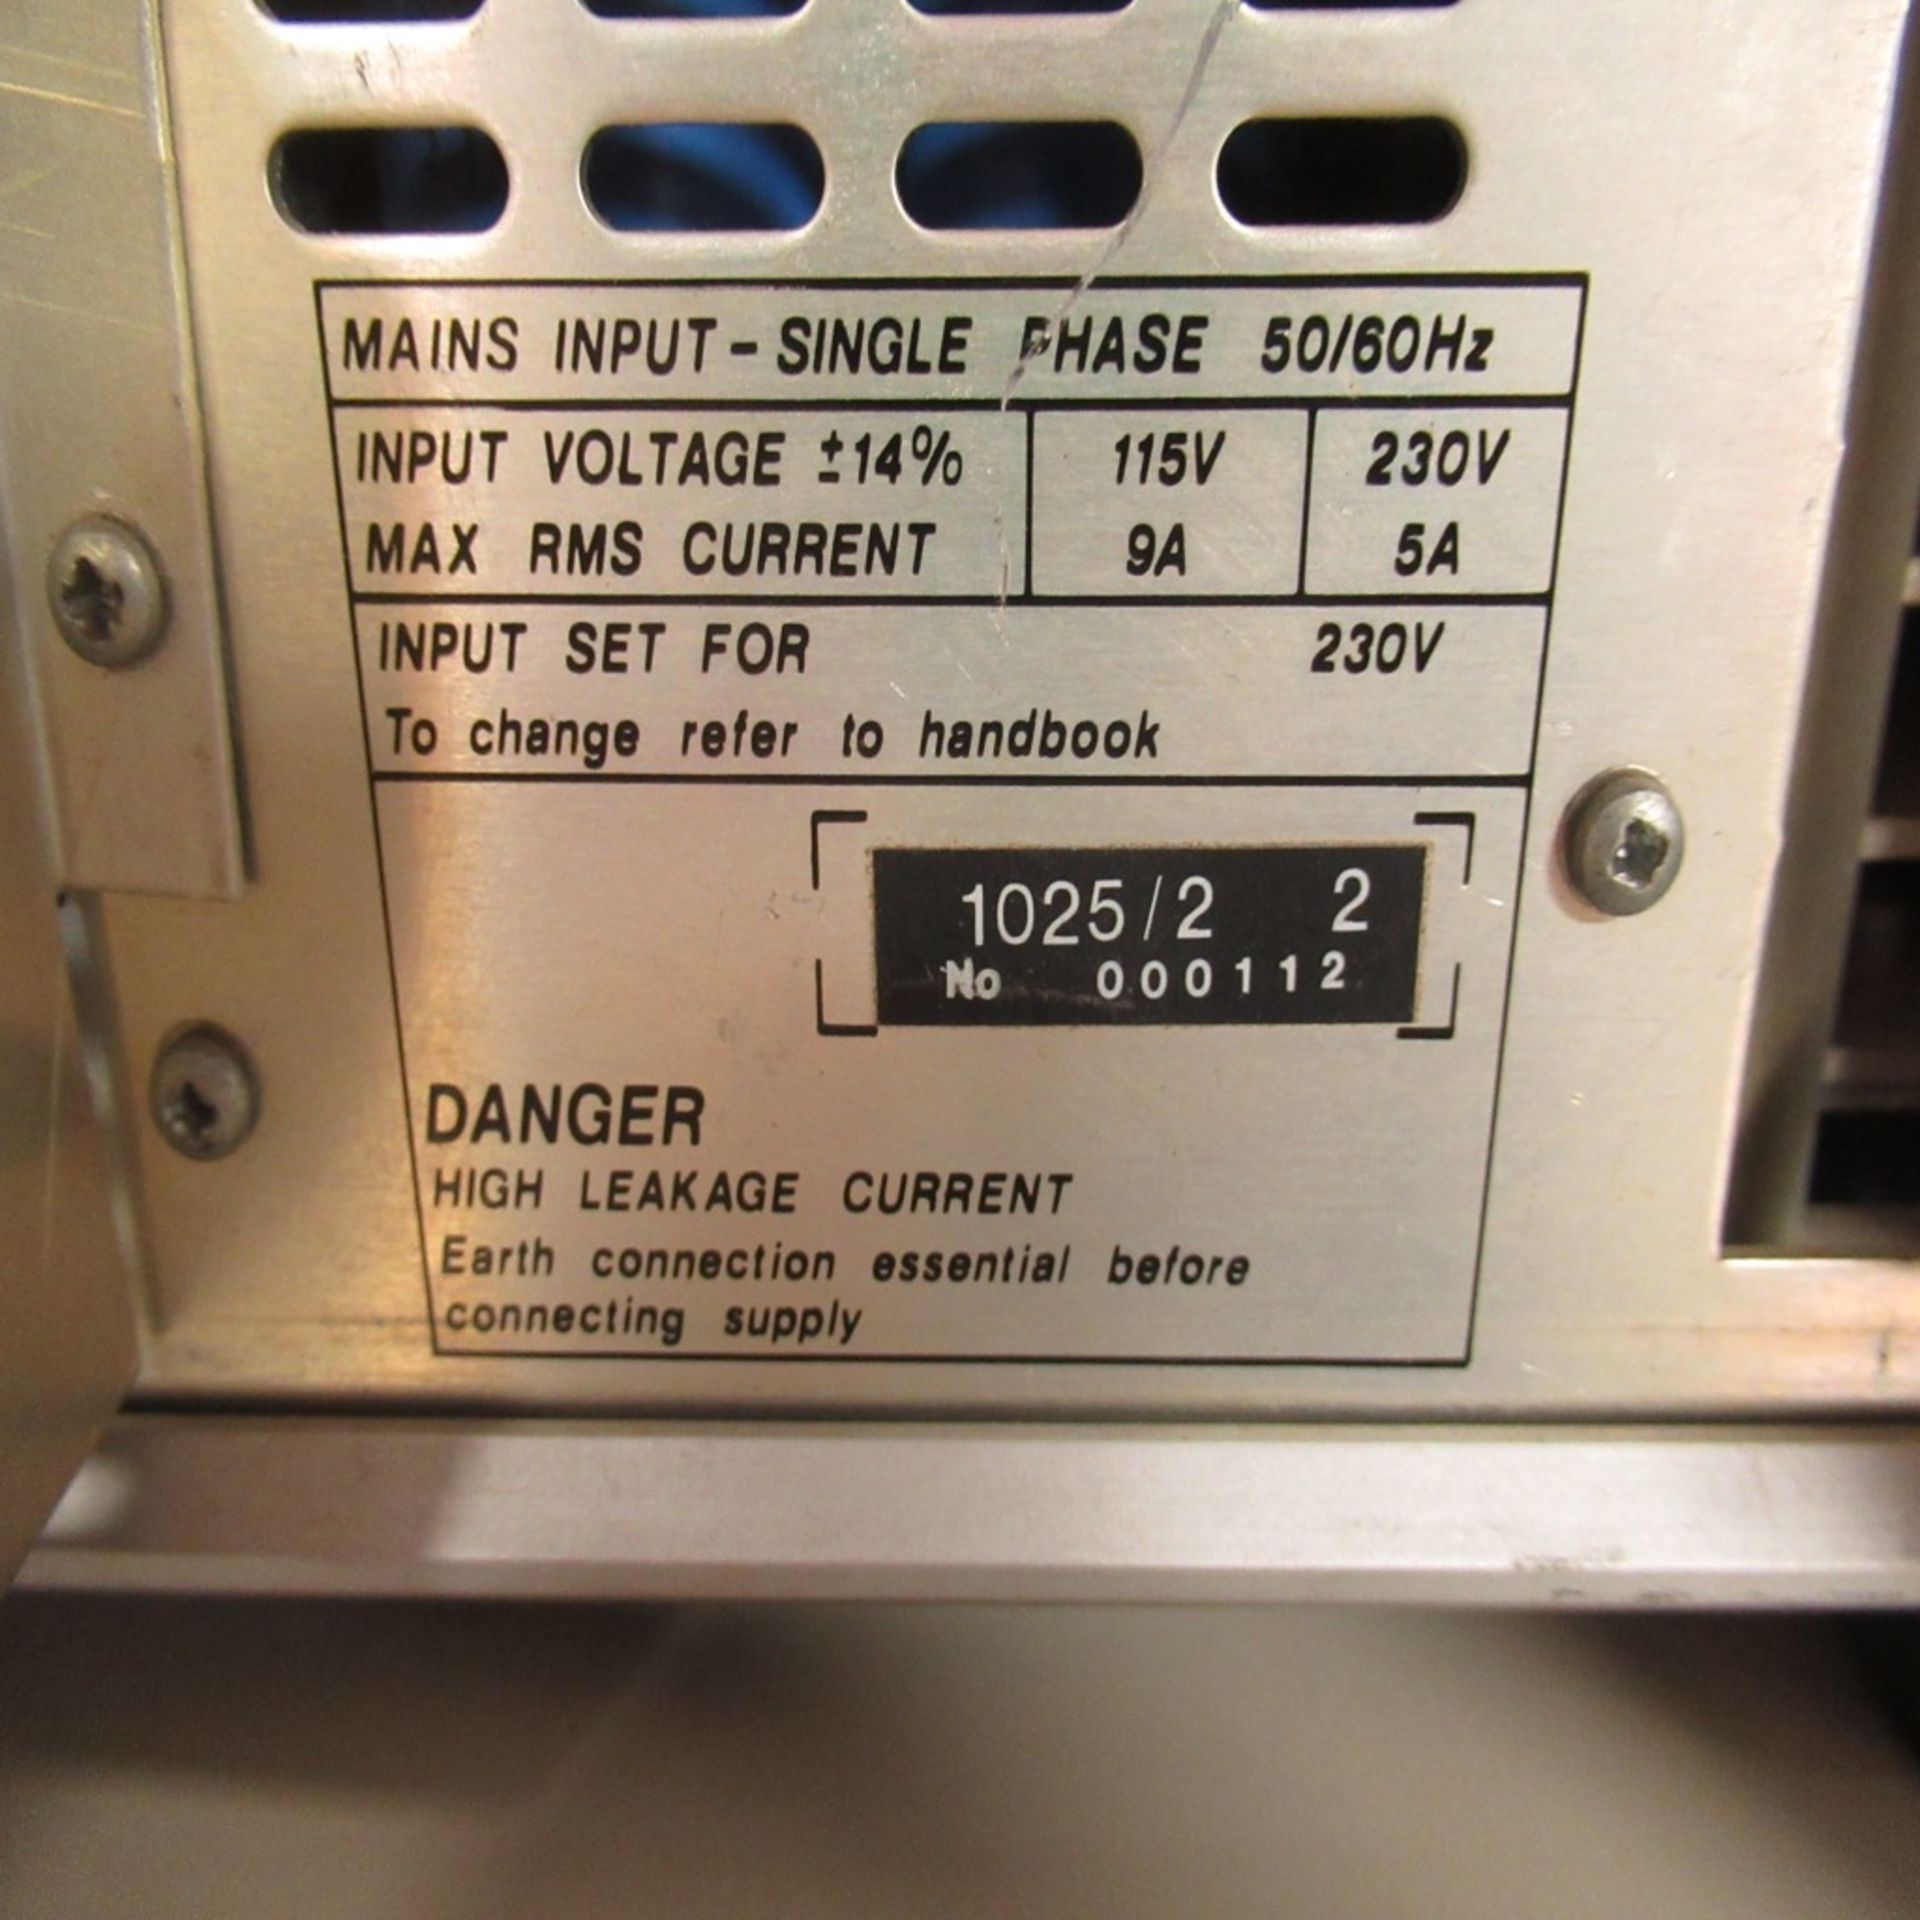 PHOTON SNAP SHOT MODEL 6000 *POWERS ON* NO SCREEN DISPLAY; FARNELL AP20-80 REGULATED POWER SUPPLY * - Image 10 of 222